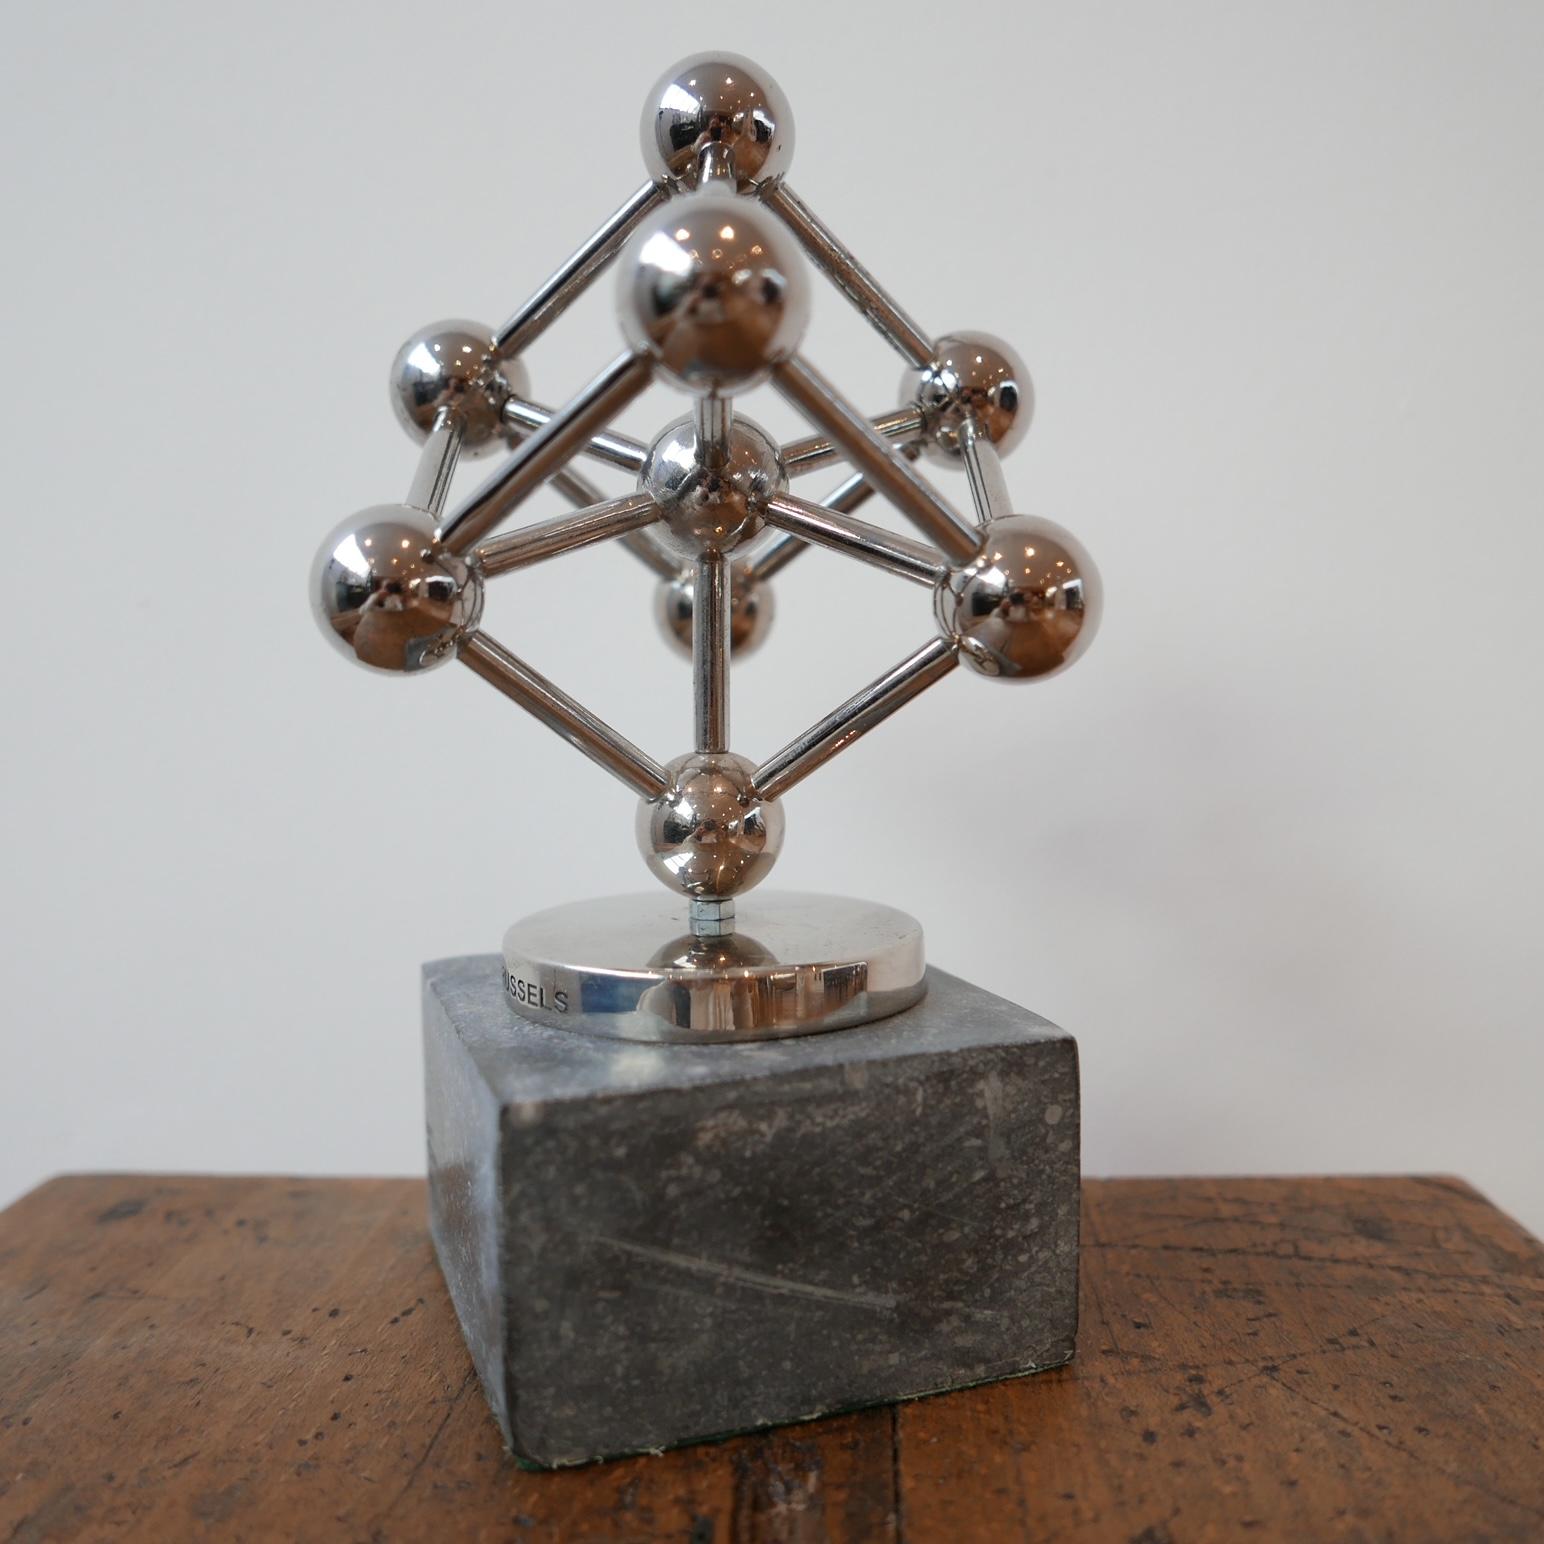 A small desk top model of the Atomium building in Brussels.

Marble base, metal model.

Belgium, c1960s.

Some small nicks and scuffs, wear commensurate with age.

Embossed 'Brussels' to the base.

Location: London Gallery.

Dimensions: 20 H x 13 W